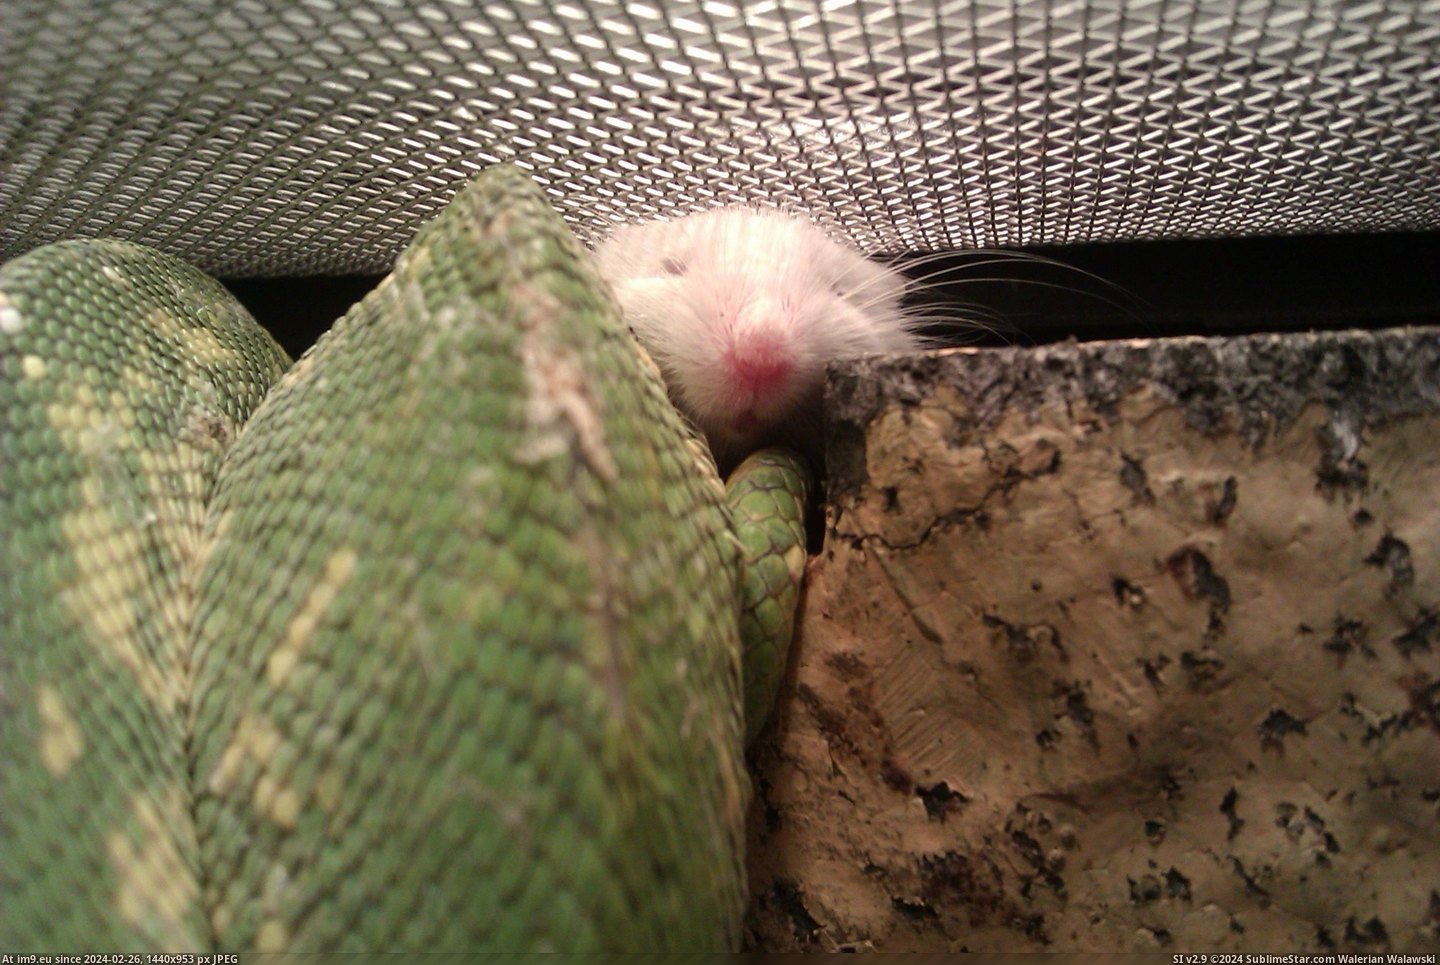 #Night #Eat #Heat #Lamp #Lived #Refuses #Togeth #Mouse #Snake #Cuddle [Aww] This snake and mouse cuddle under the heat lamp every night. He refuses to eat this particular mouse. They've lived togeth Pic. (Bild von album My r/AWW favs))